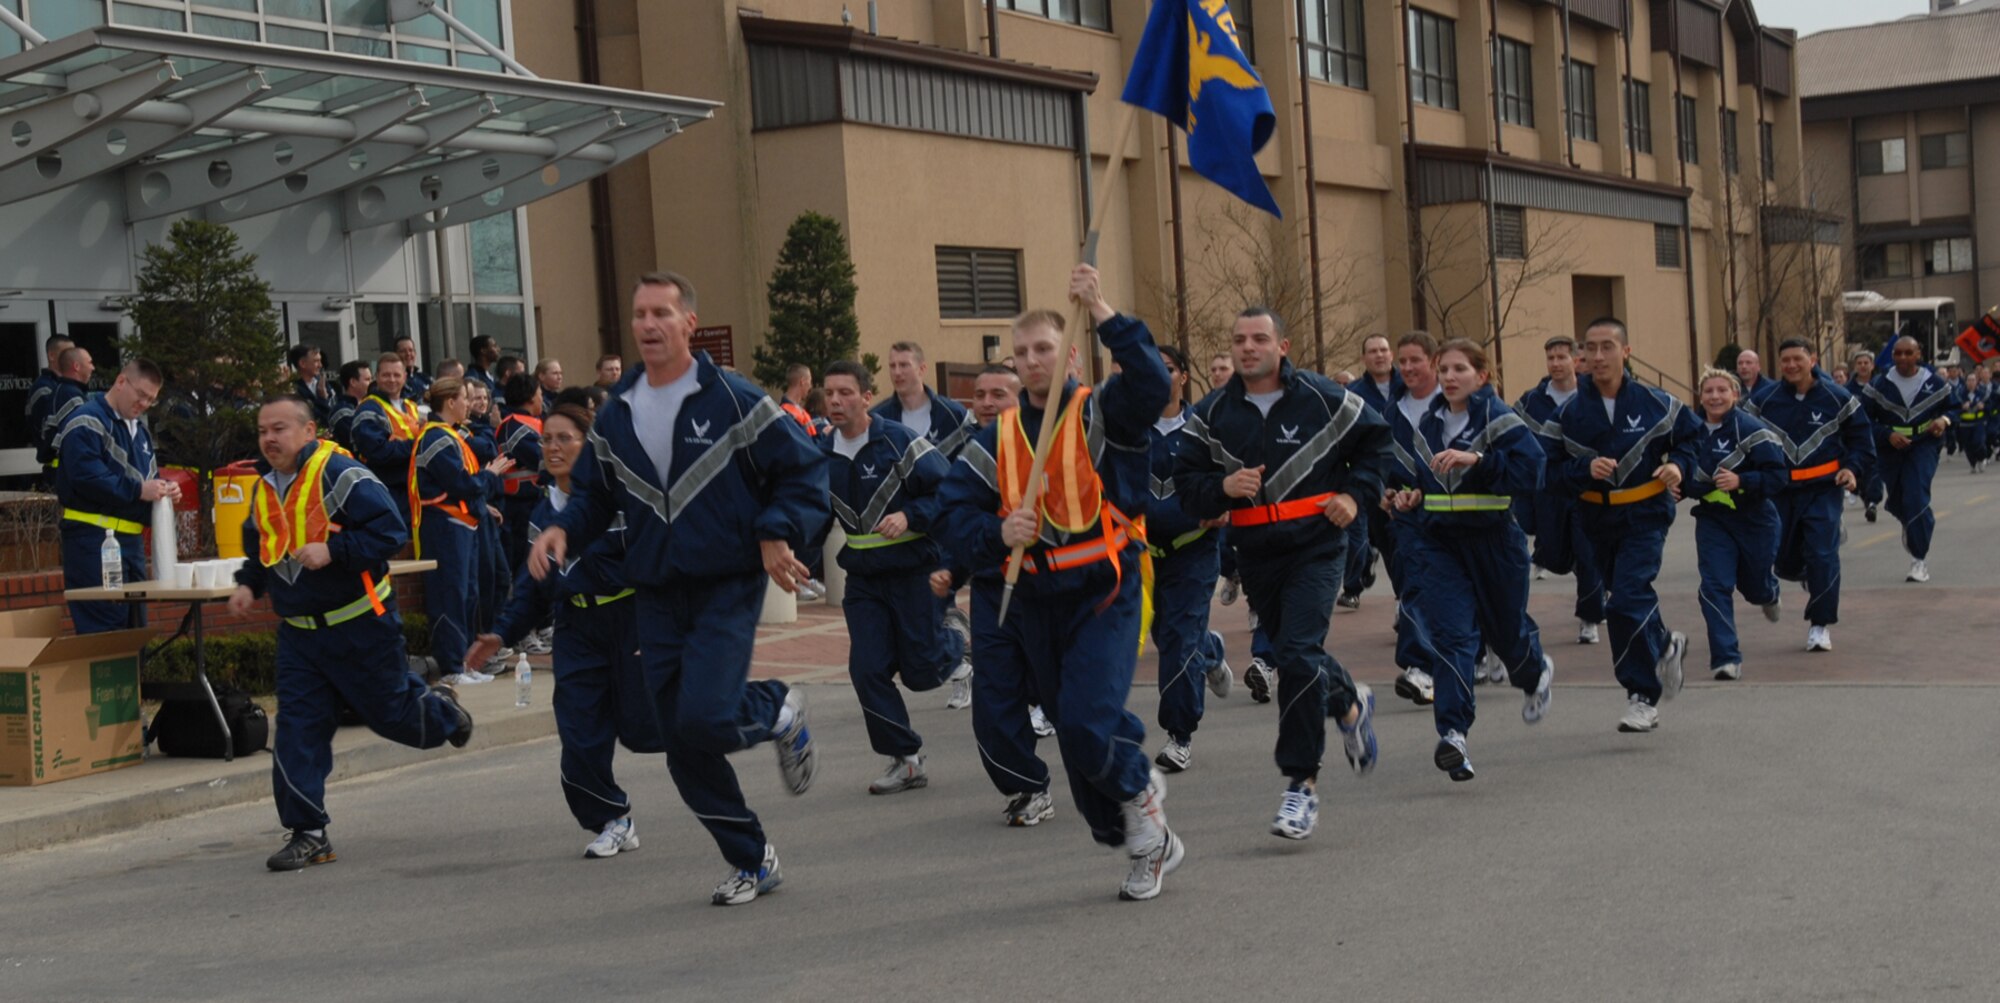 OSAN AIR BASE, Republic of Korea --  Members of the Seventh Air Force finish up the Commander's Warrior Run on Thursday. The 2-mile, team-building run began and ended in front of the Osan Fitness Center here. (U.S. Air Force photo by Airman 1st Class Chad Strohmeyer)